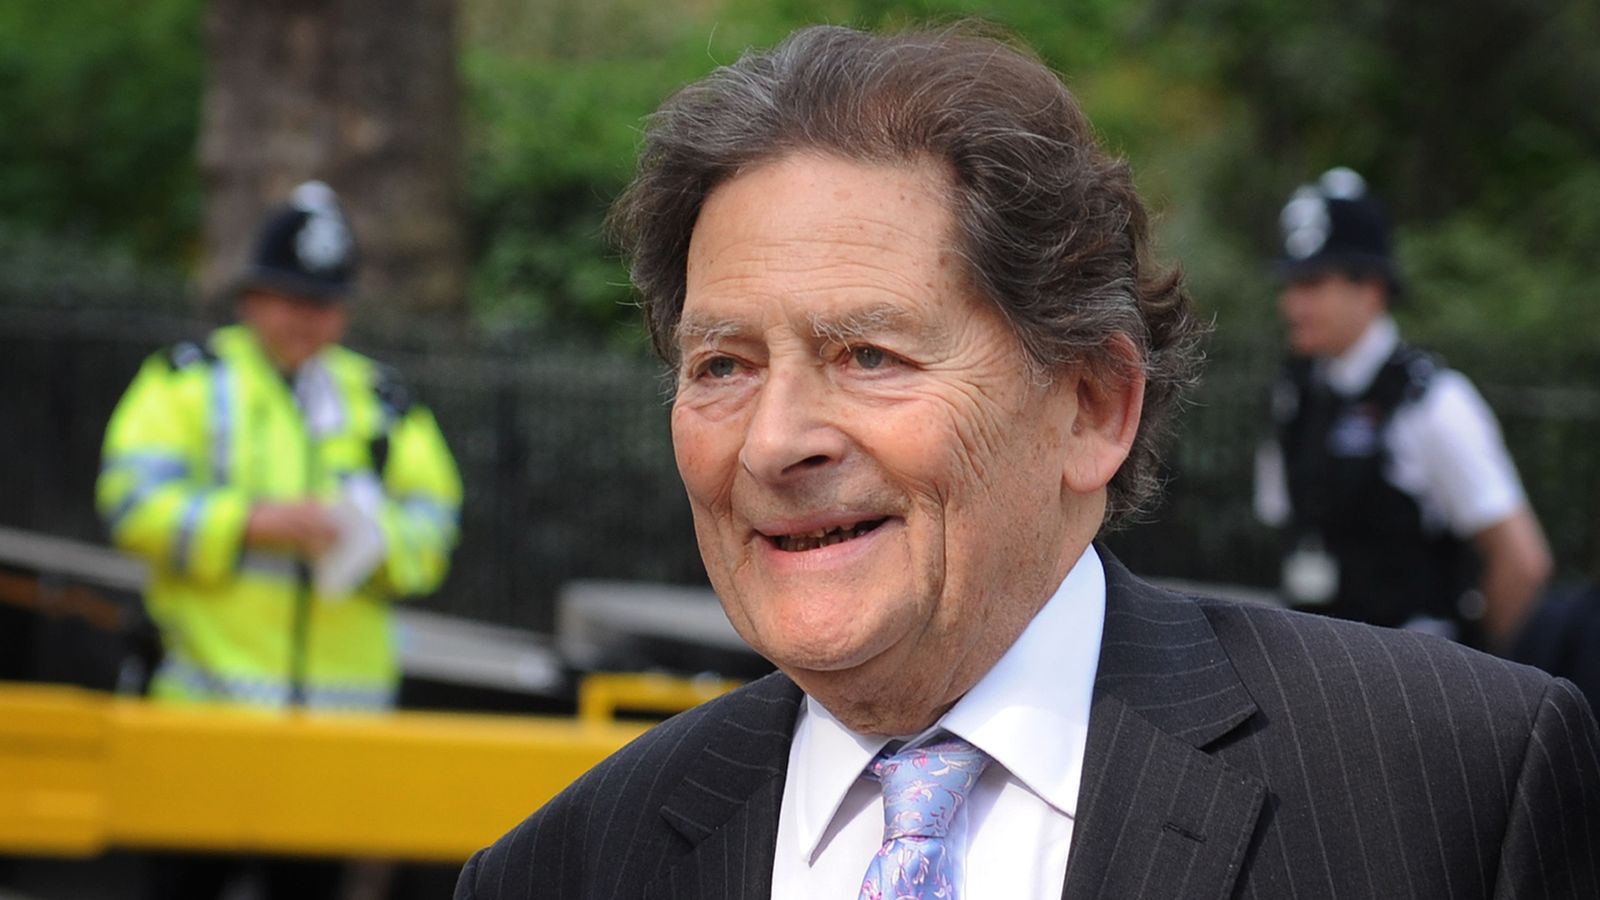 Nigel Lawson dies: Tributes paid to 'giant' of politics after former chancellor dies aged 91